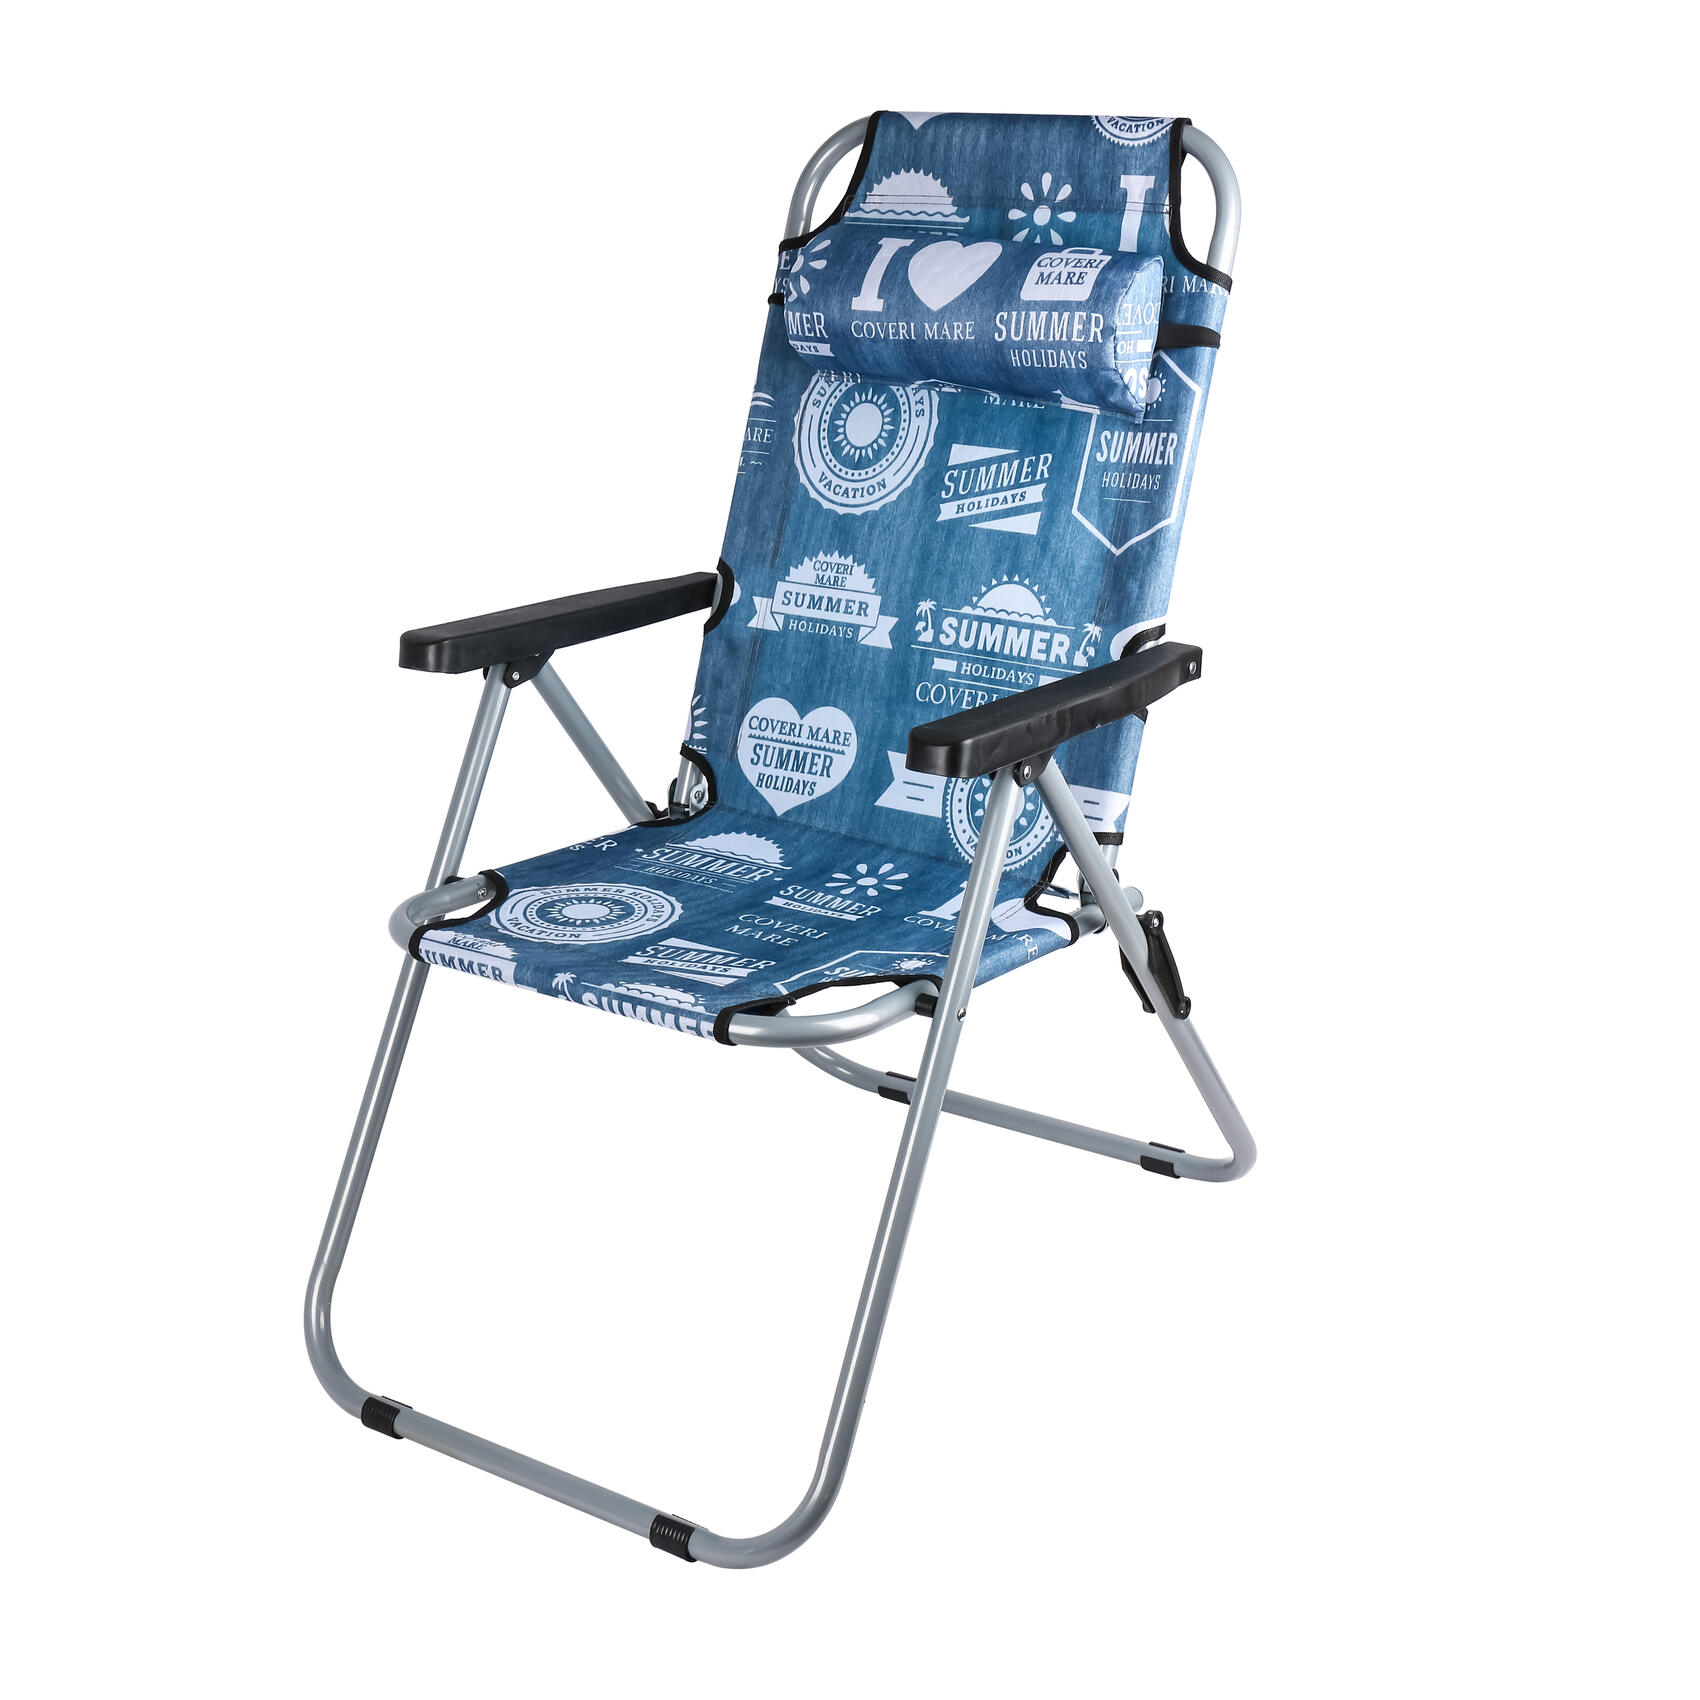 CAMPMATE FOLDABLE CAMPING CHAIR CM-7879 WITH HEADREST | UDJESTING | RELAXING SLEEPING CHAIR